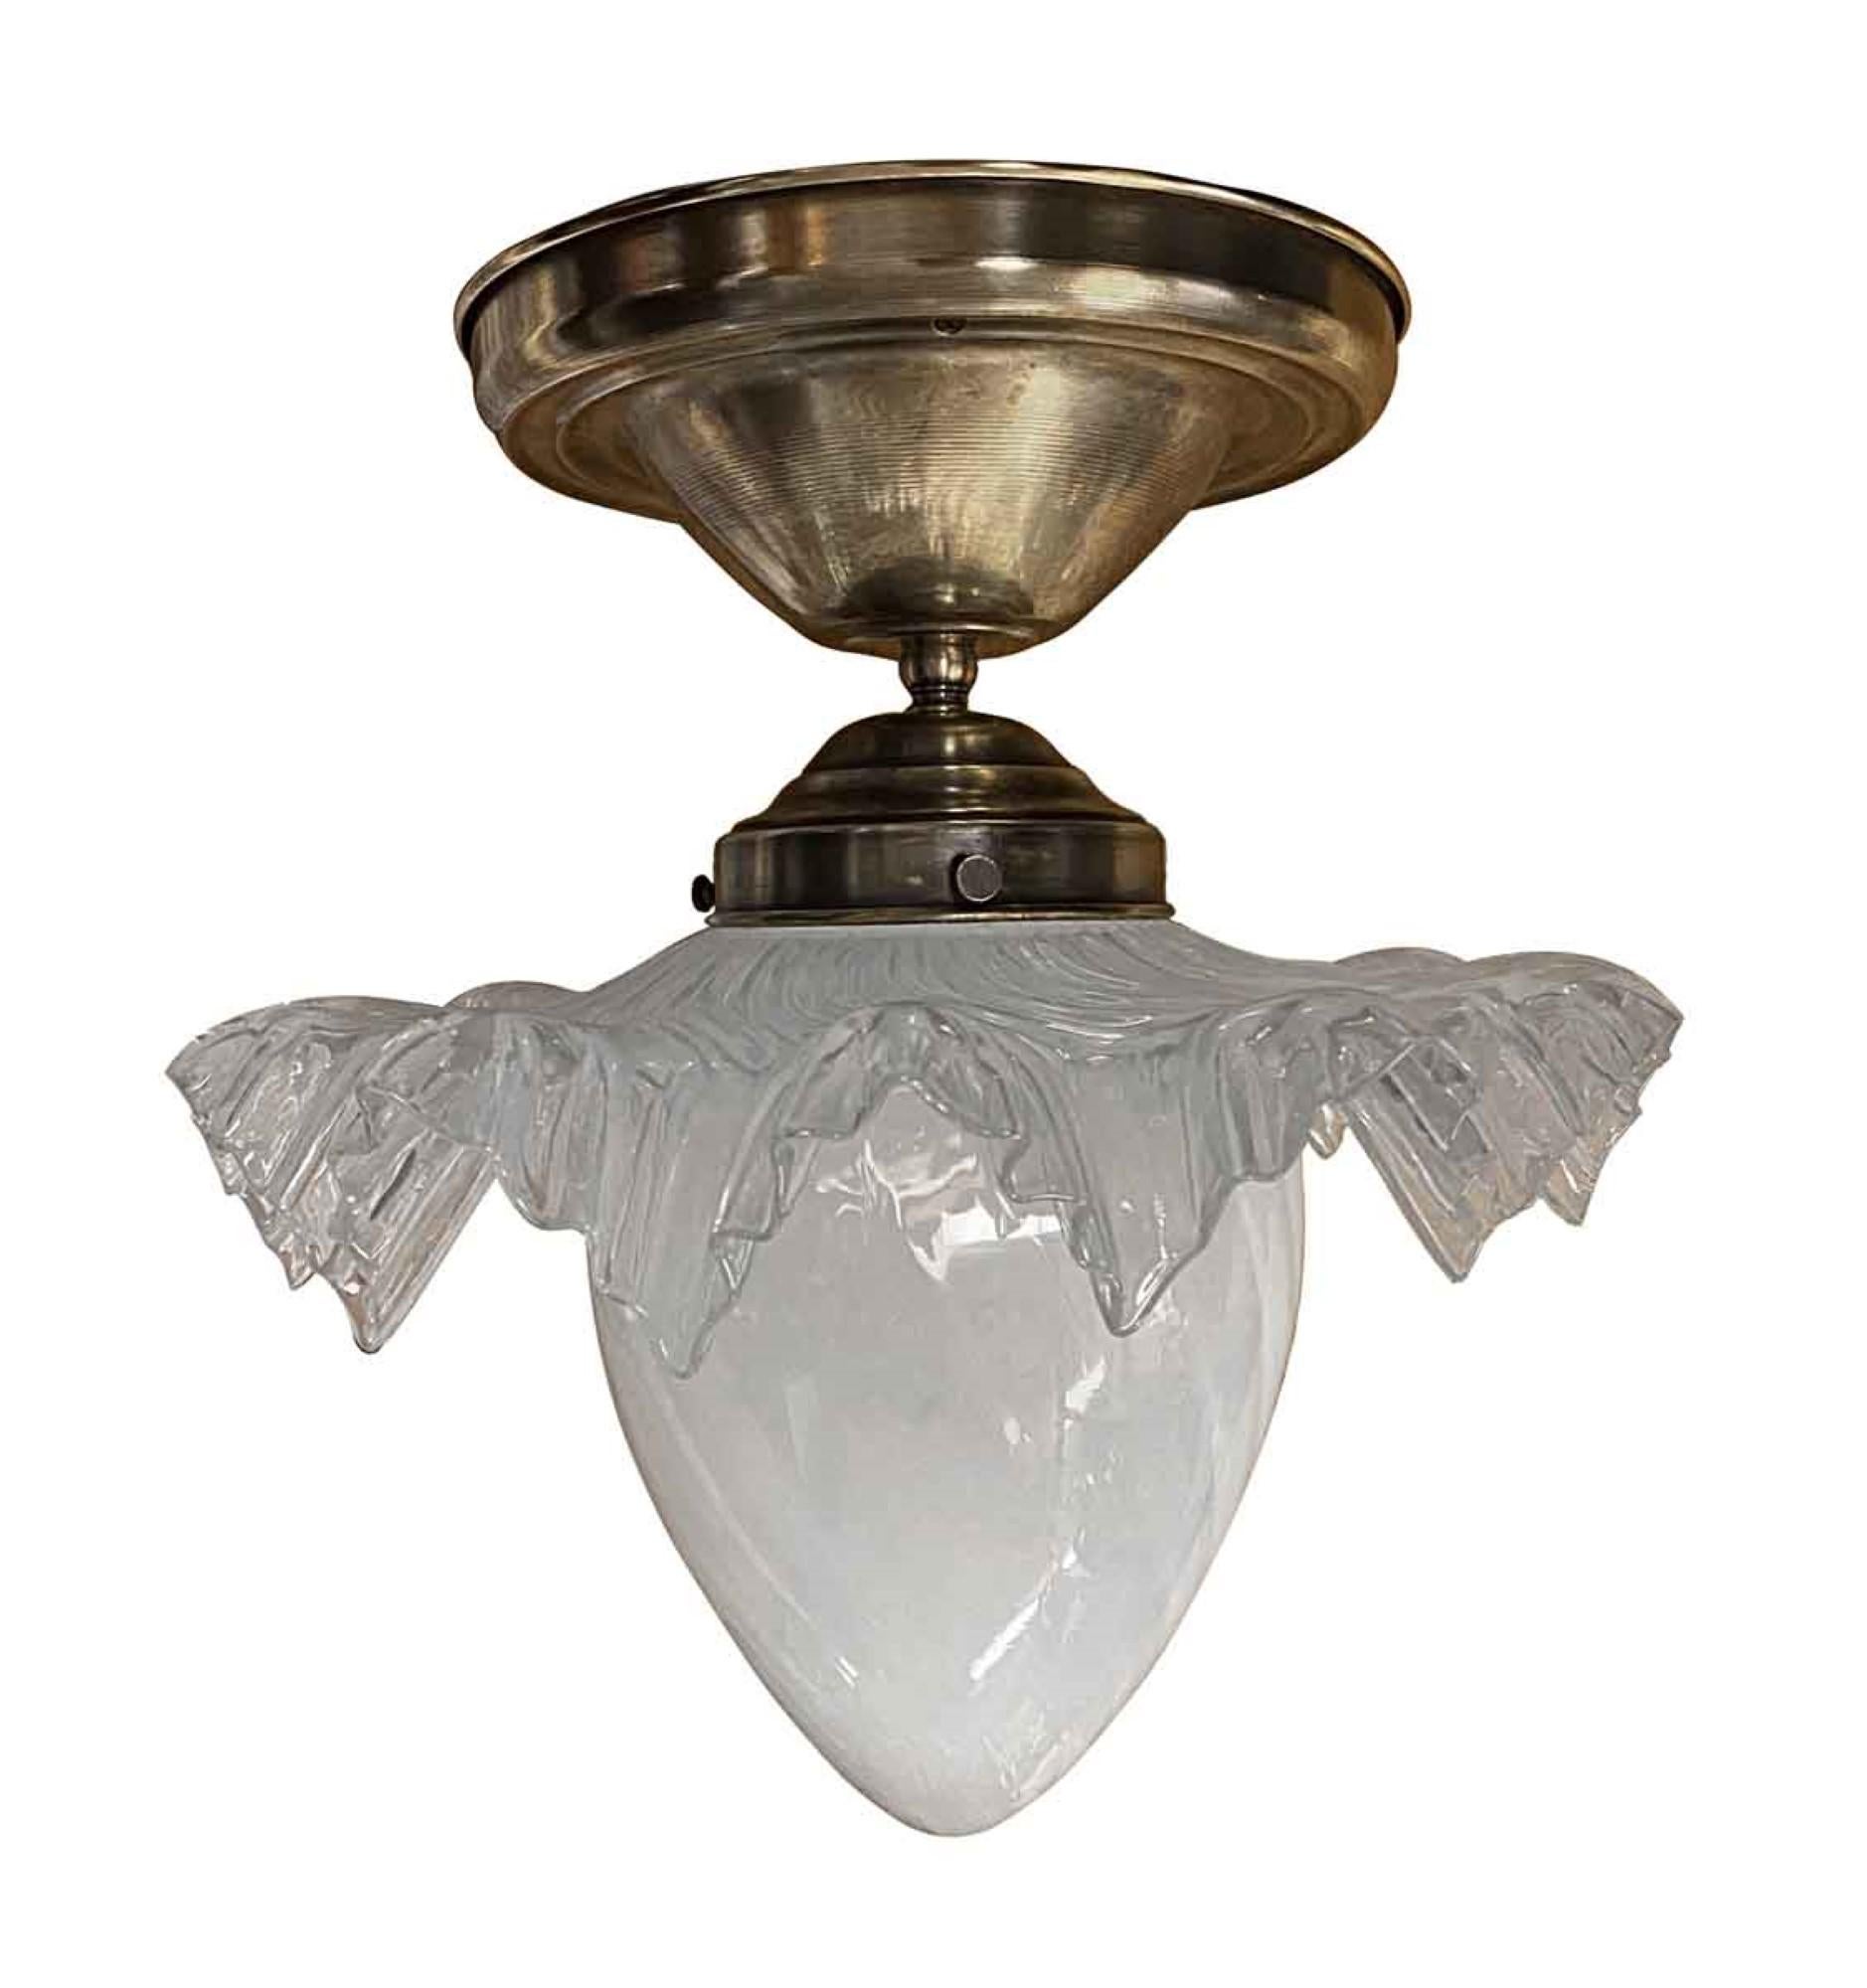 Brass semi flush mount light with a two-piece opalescent teardrop glass globe with ruffled edges. From a 1970s hotel. Please note, this item is located in our Scranton, PA location.